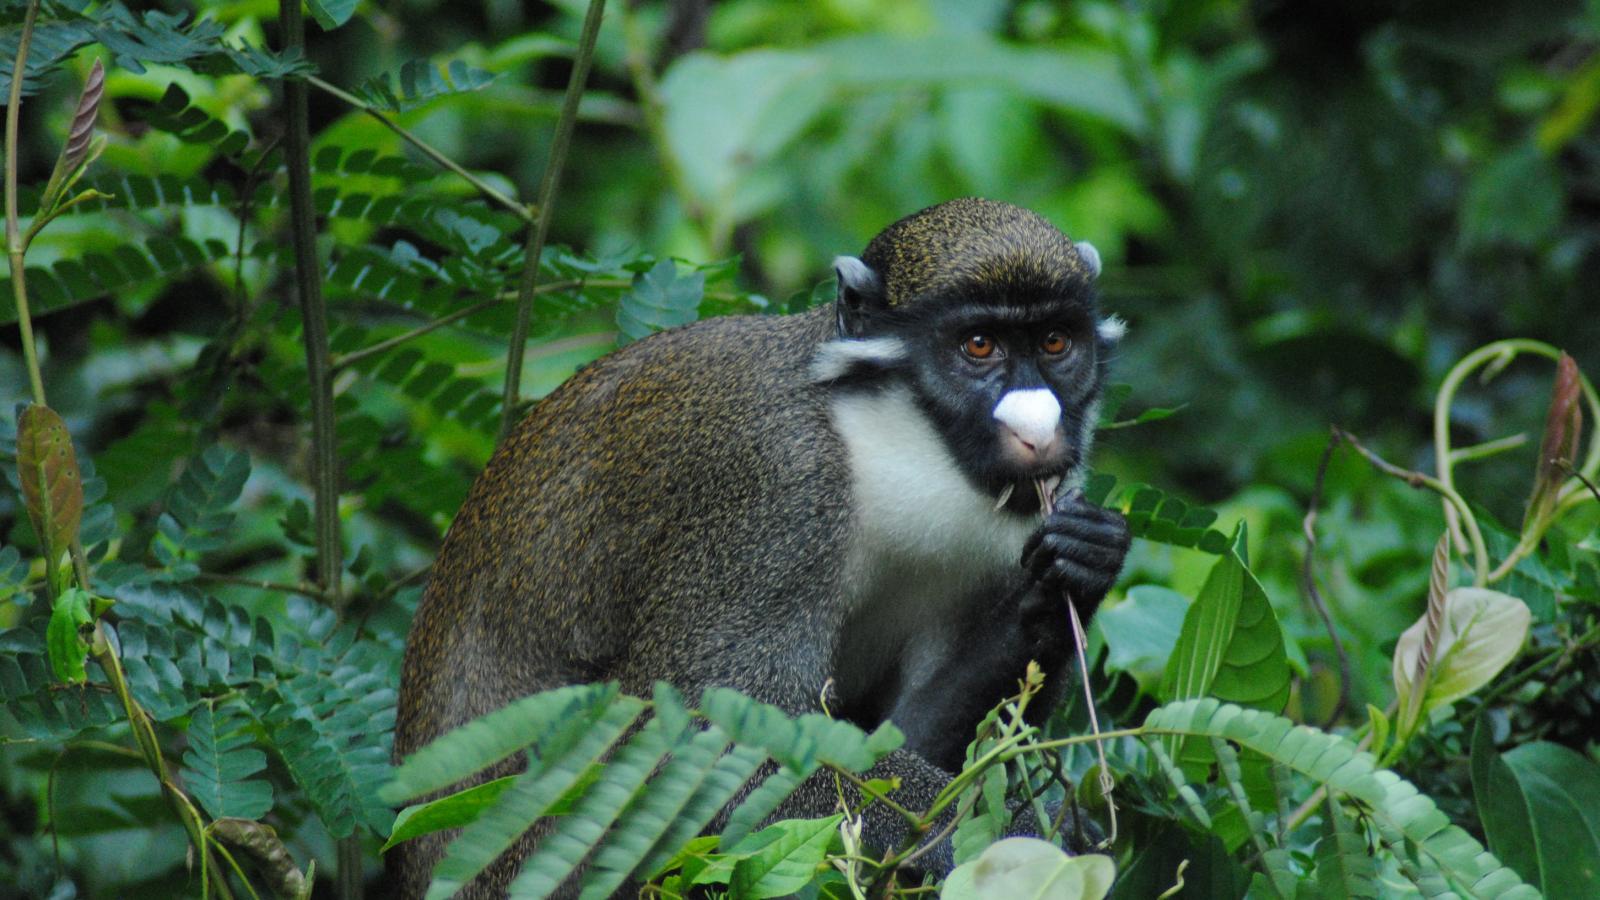 Photo of a lesser spot-nosed guenon, by PhD student Erin Kane